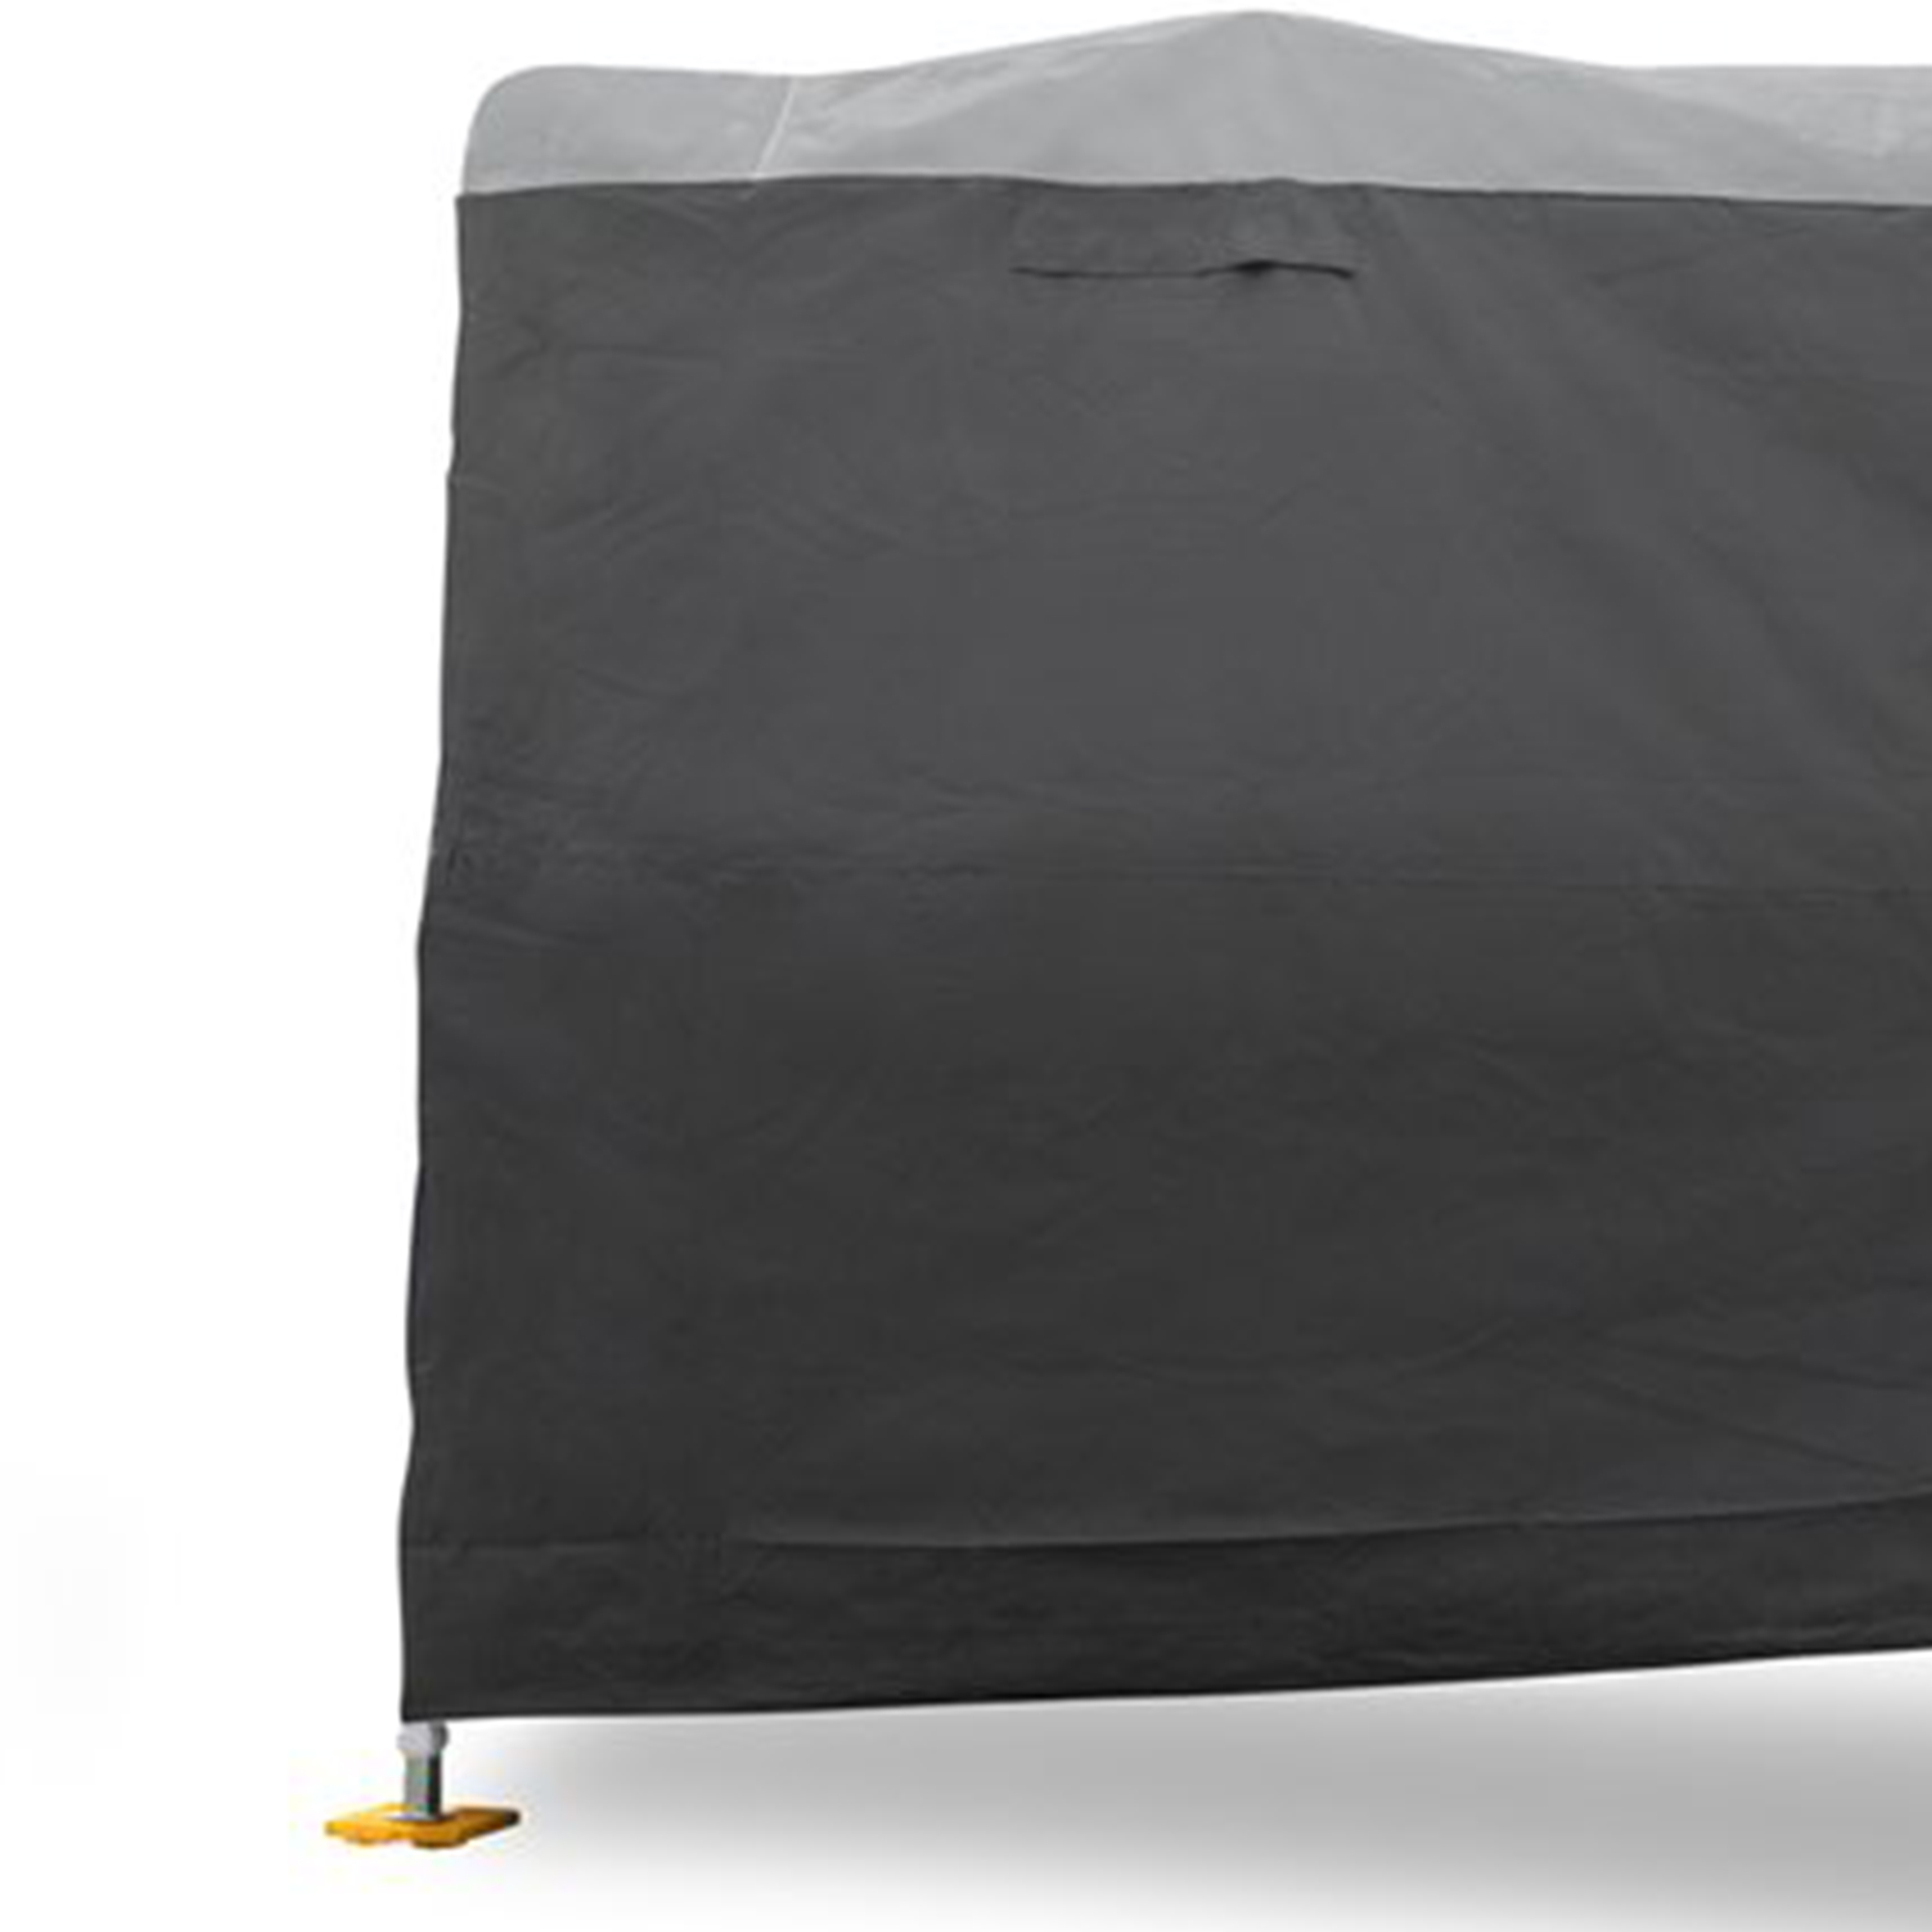 Camco ULTRAGuard Camper/RV Cover Fits Slide-In Campers Up to 19-feet  8-inches Extremely Durable Design that Protects Against the Elements  (45773)